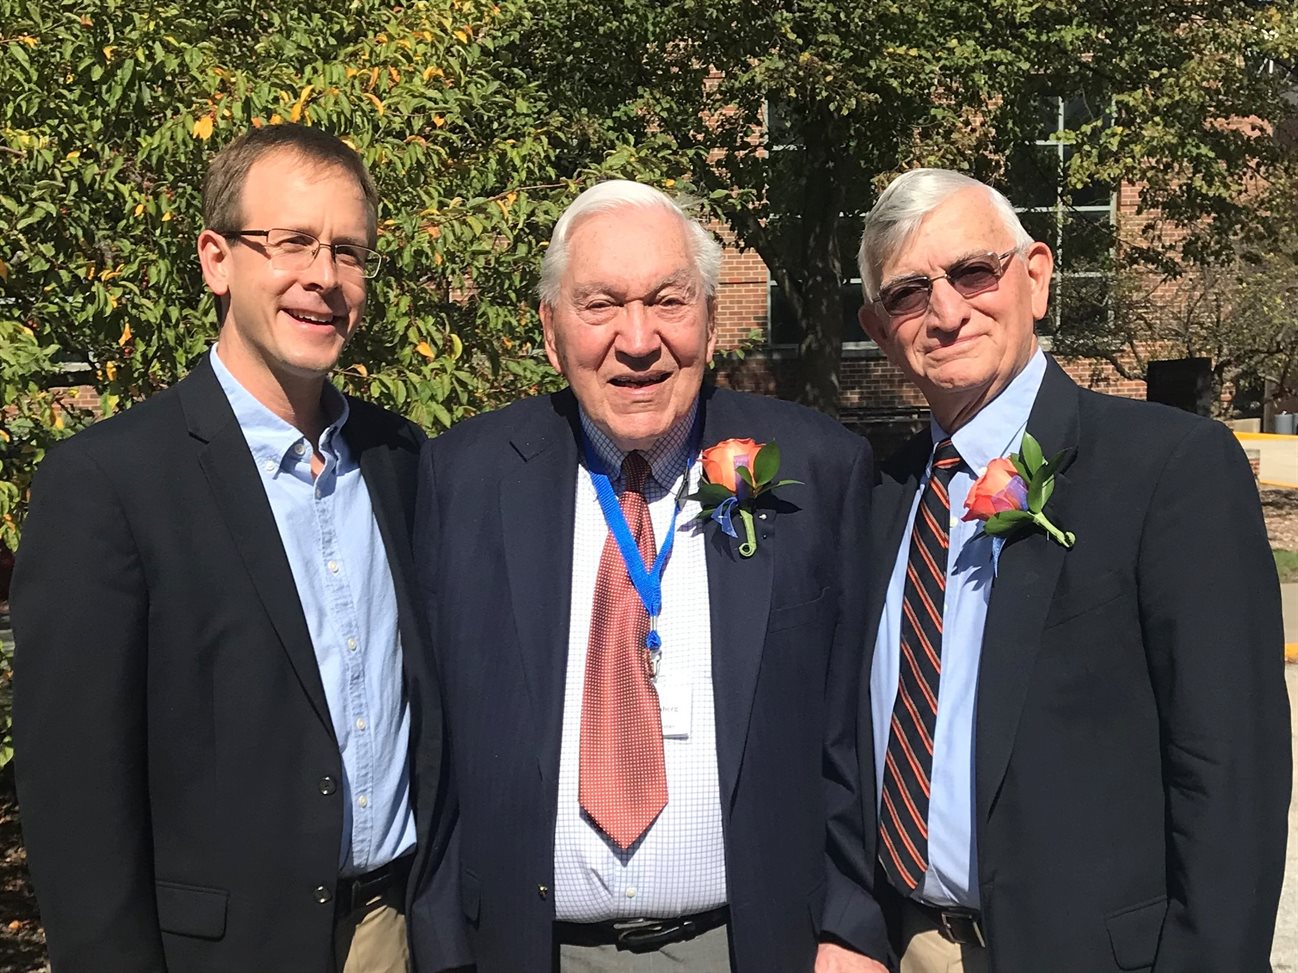 &lt;span style=&quot;font-size: 0.8em;&quot;&gt;University of Illinois professors, from left, Jeff Roesler&lt;/span&gt;&lt;span style=&quot;font-size: 0.8em;&quot;&gt;, Ernest Barenberg&lt;/span&gt;&lt;span style=&quot;font-size: 0.8em;&quot;&gt; and Marshall Thompson attend Illinois&rsquo; Civil and Environmental Engineering Alumni Association luncheon on Oct. 13, 2017. Barenberg&lt;/span&gt;&lt;span style=&quot;font-size: 0.8em;&quot;&gt; and Thompson were honored with CEE's &lt;/span&gt;&lt;span style=&quot;font-size: 0.8em;&quot;&gt;Distinguished Faculty Awards for their contributions to the department, research and education of students.&lt;/span&gt;